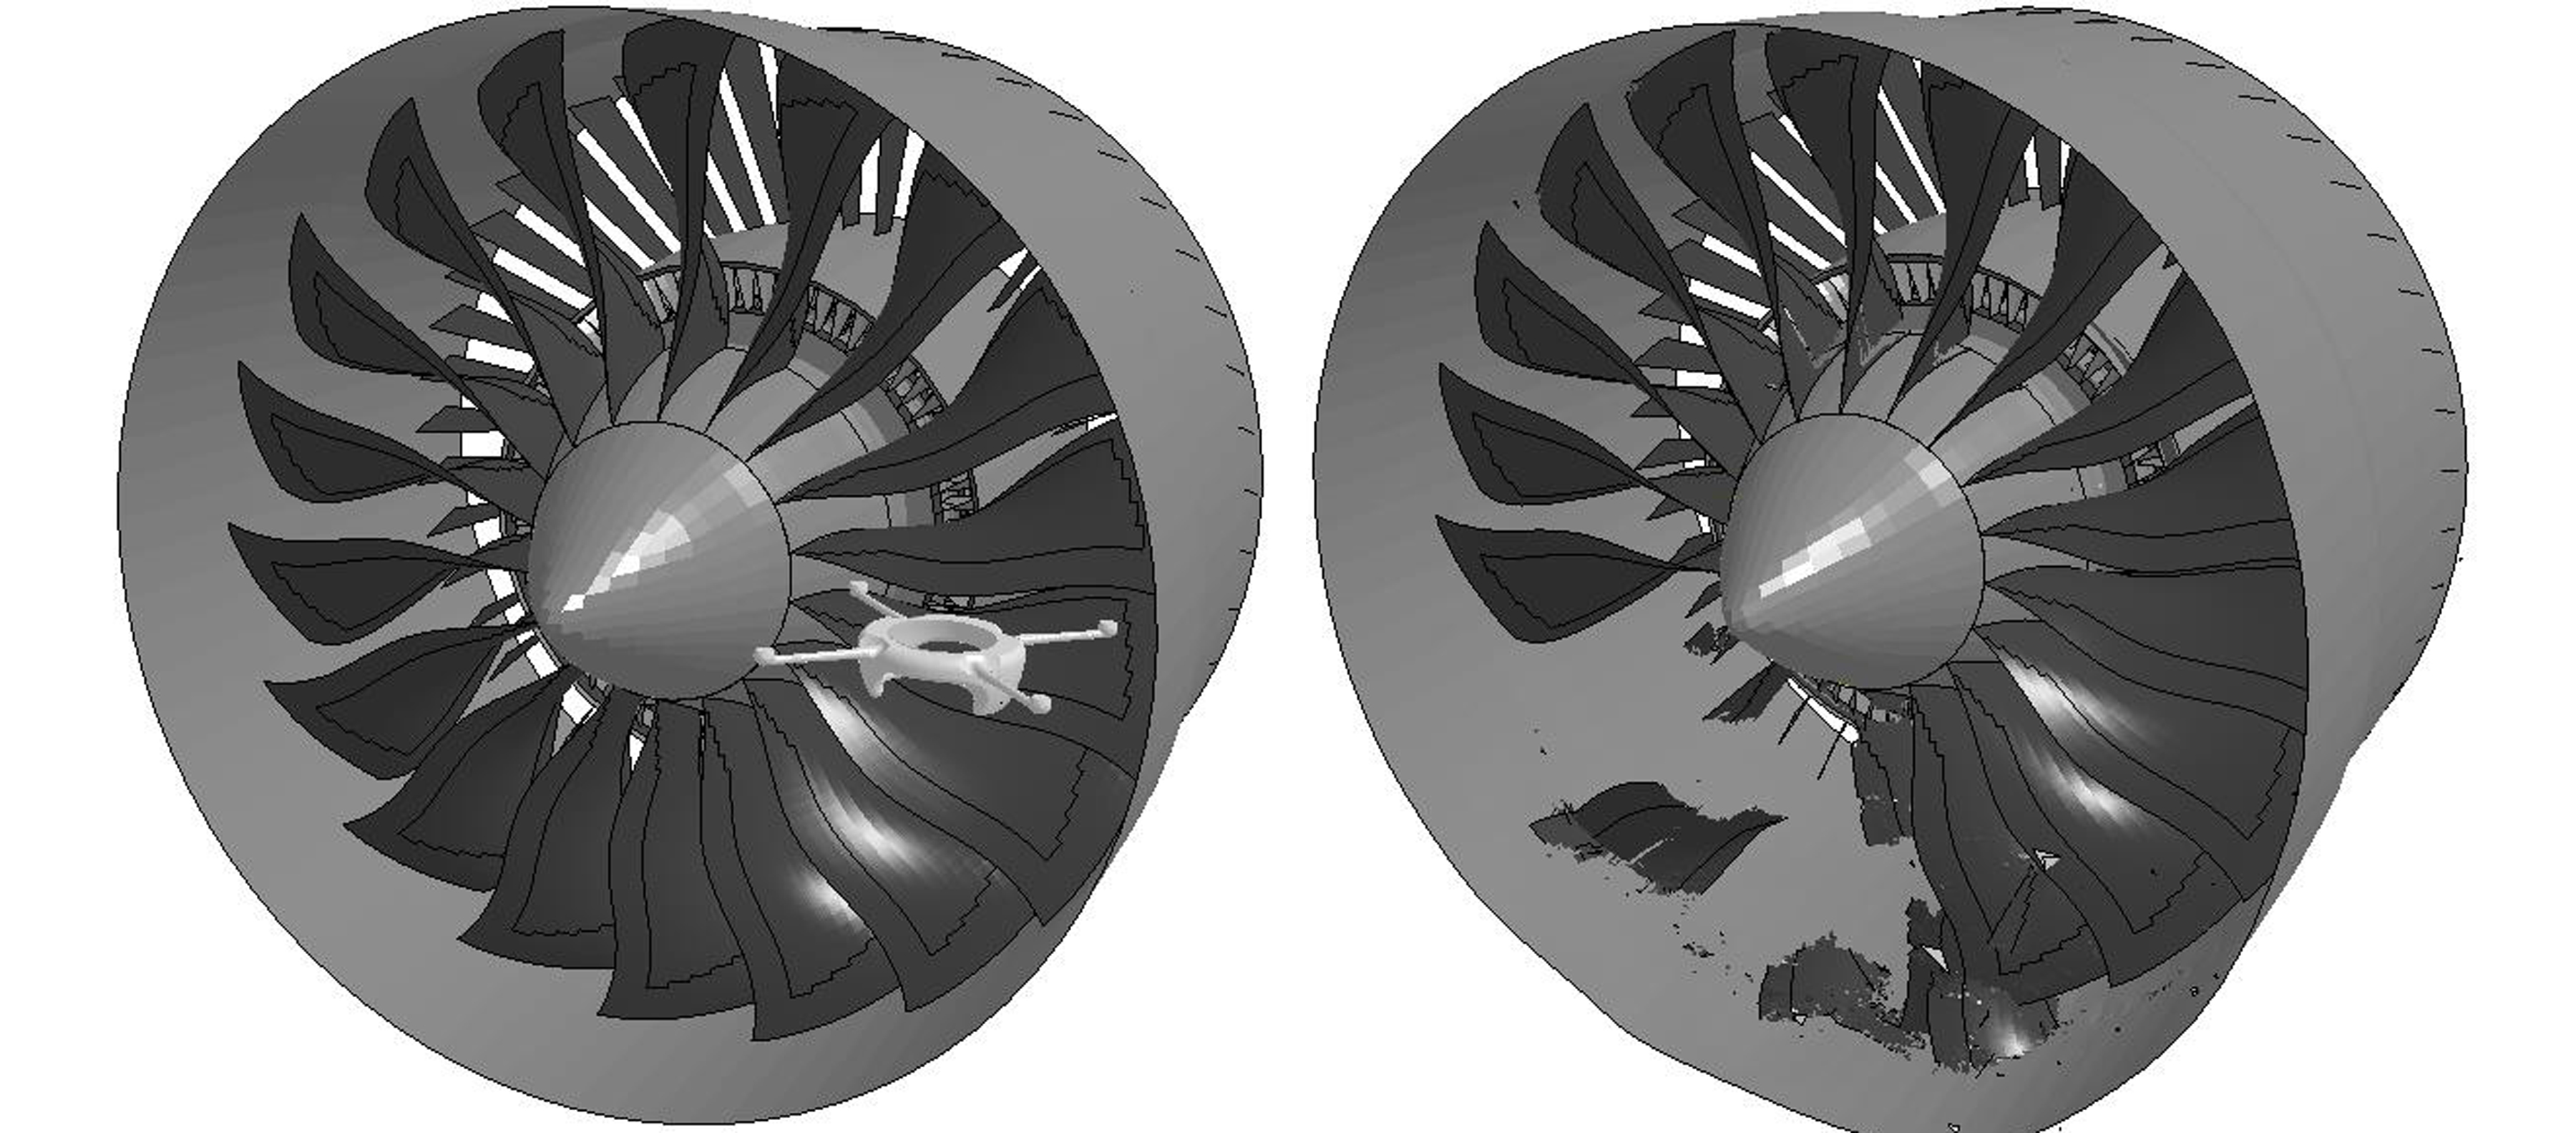 CAD image of jet engine struck by done